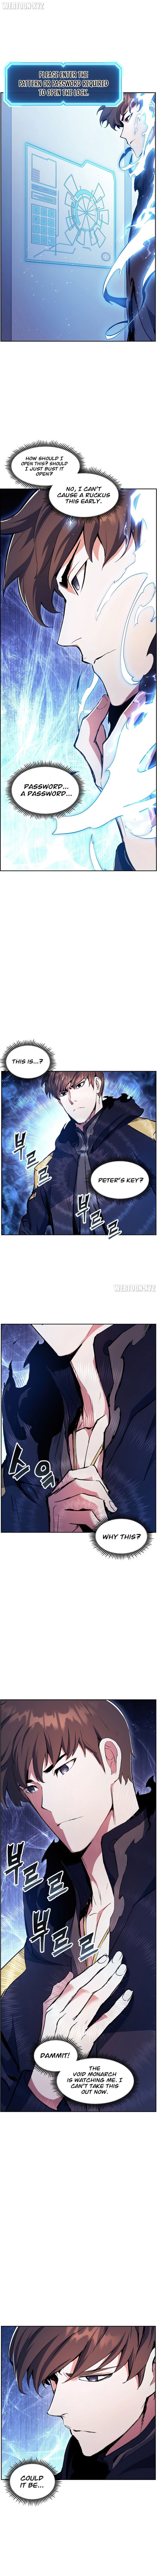 return-of-the-shattered-constellation-chap-45-5